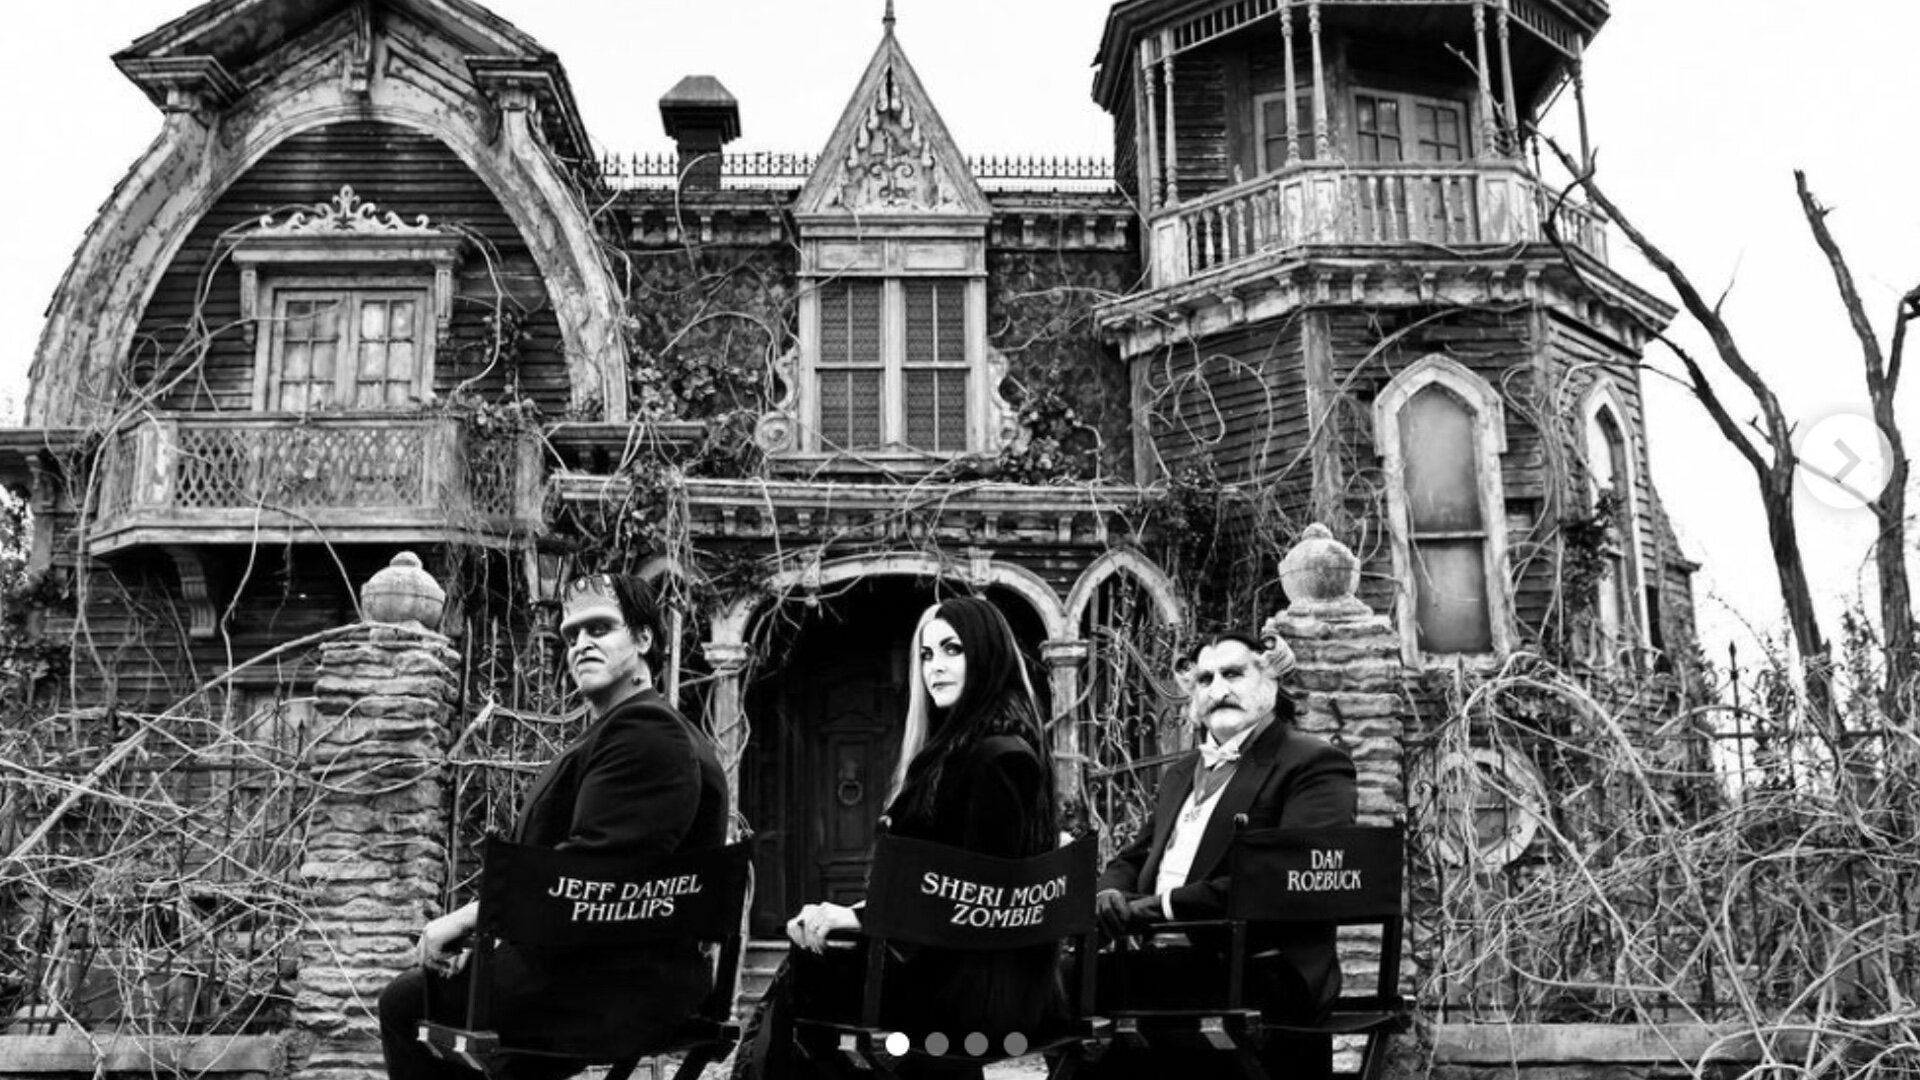 first-look-at-rob-zombies-the-munsters-with-the-cast-in-costume-and-the-creepy-mansion.jpg